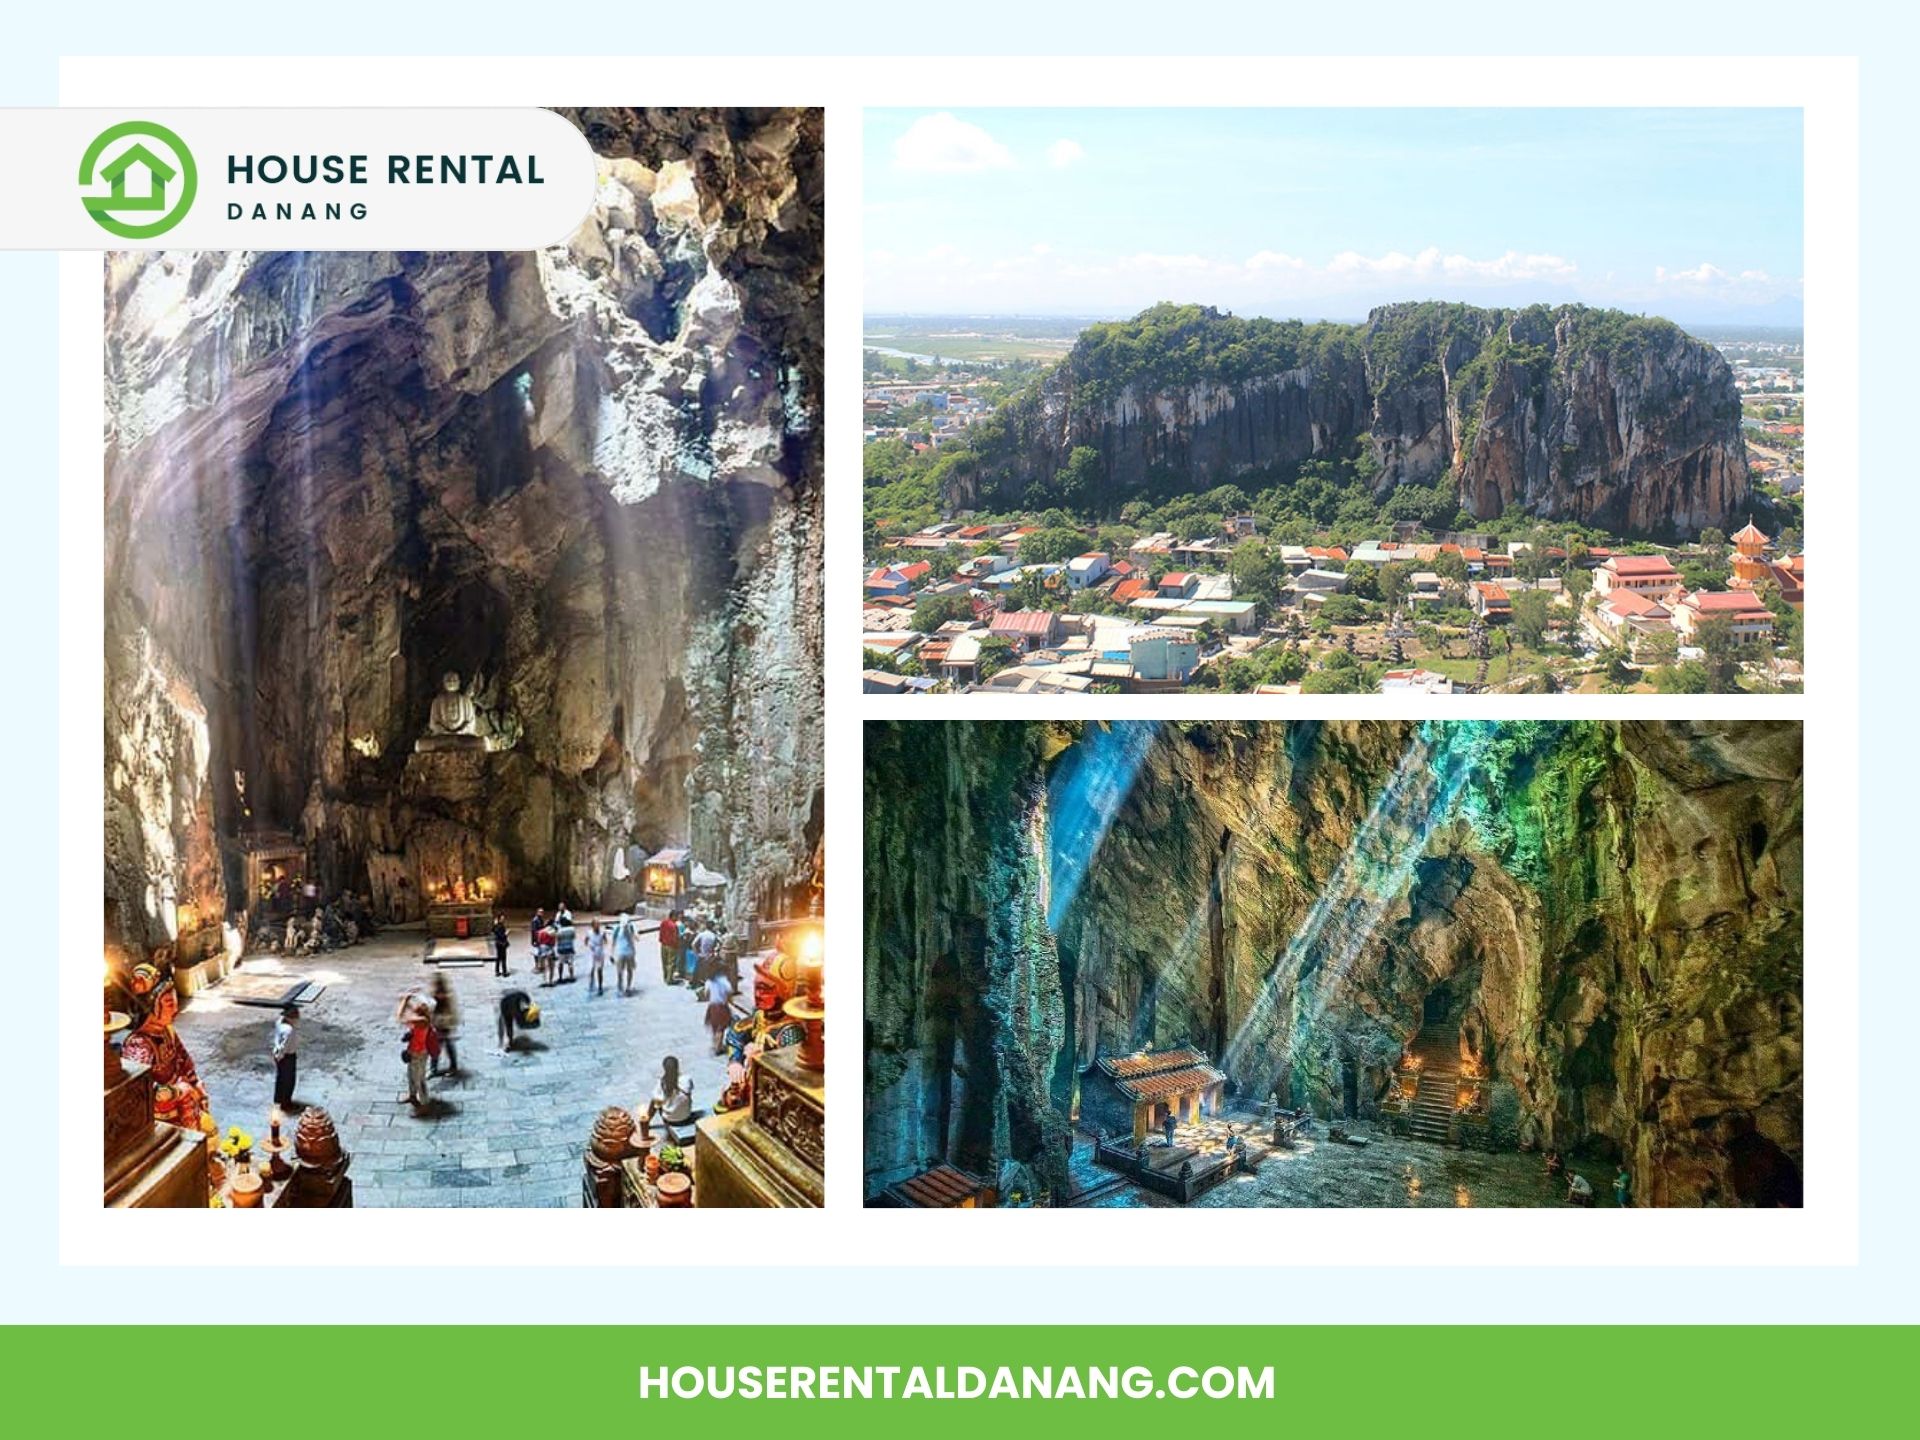 Triptych image showcasing the best places to visit in Da Nang. Left: People exploring a large cave. Top right: Aerial view of a rocky hill with buildings below. Bottom right: Sunlight streaming into a cave with temple structures, all promoting House Rental Danang.